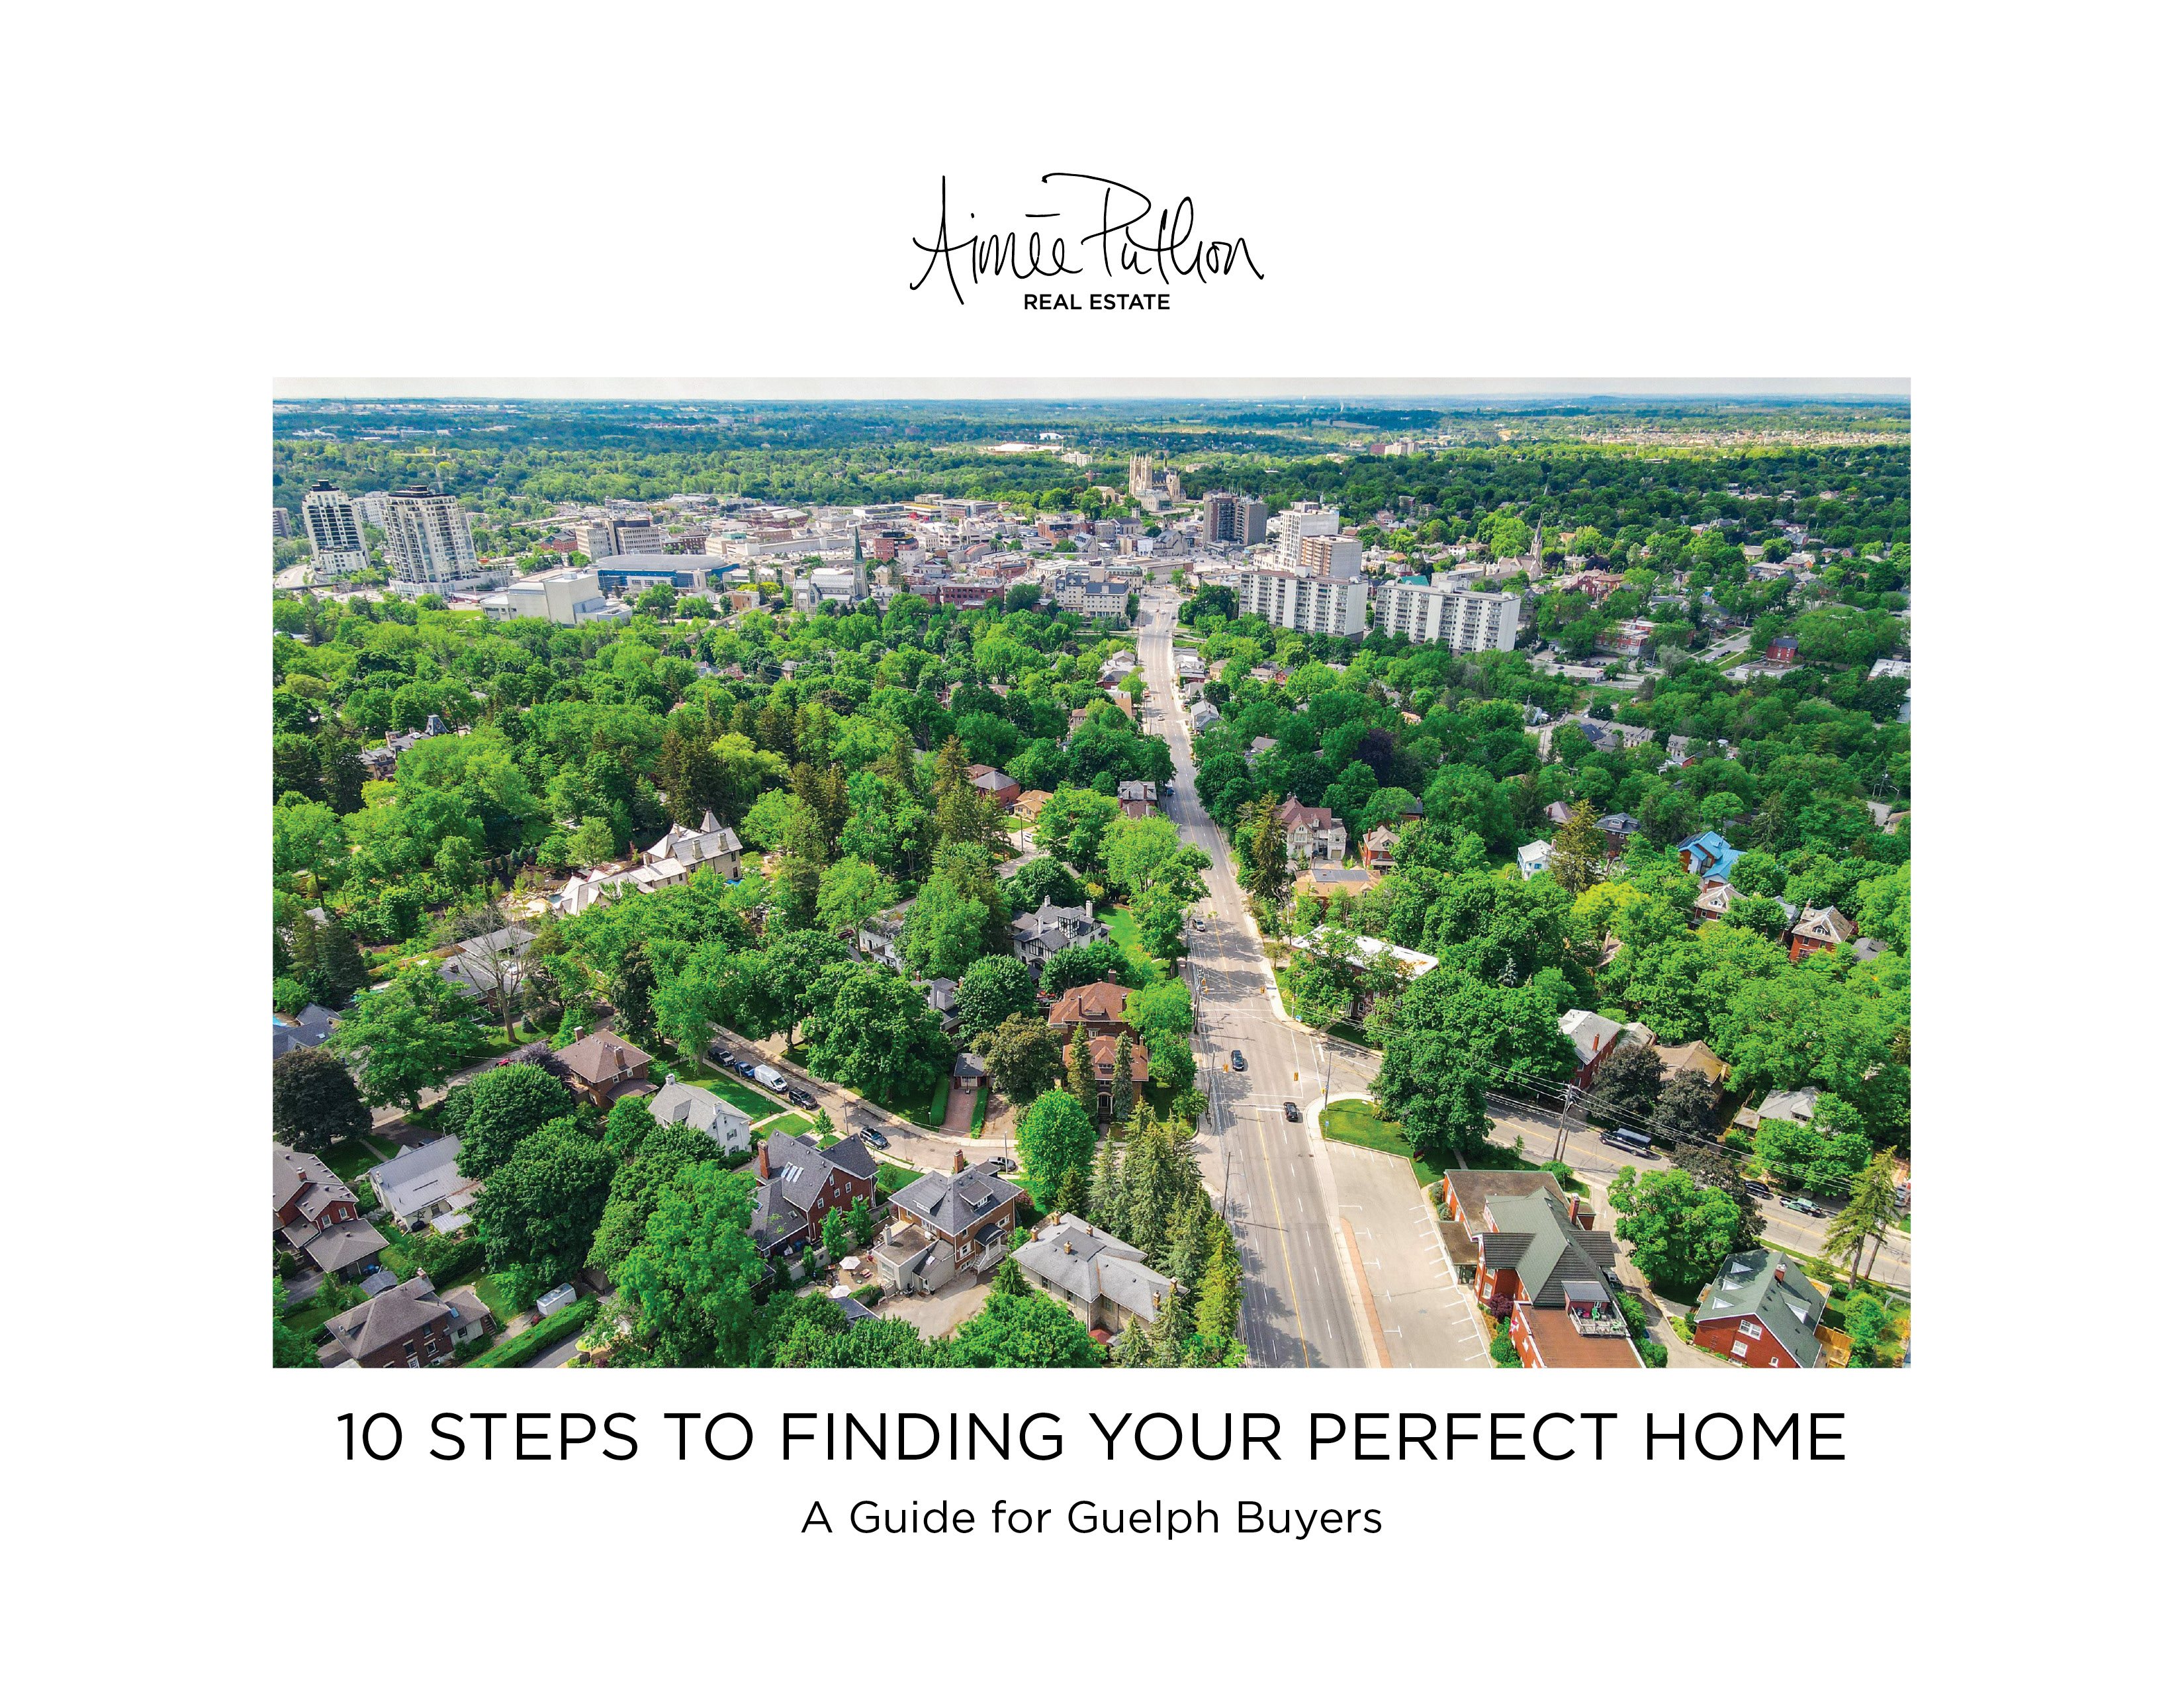 Aimee Puthon Real Estate Guides